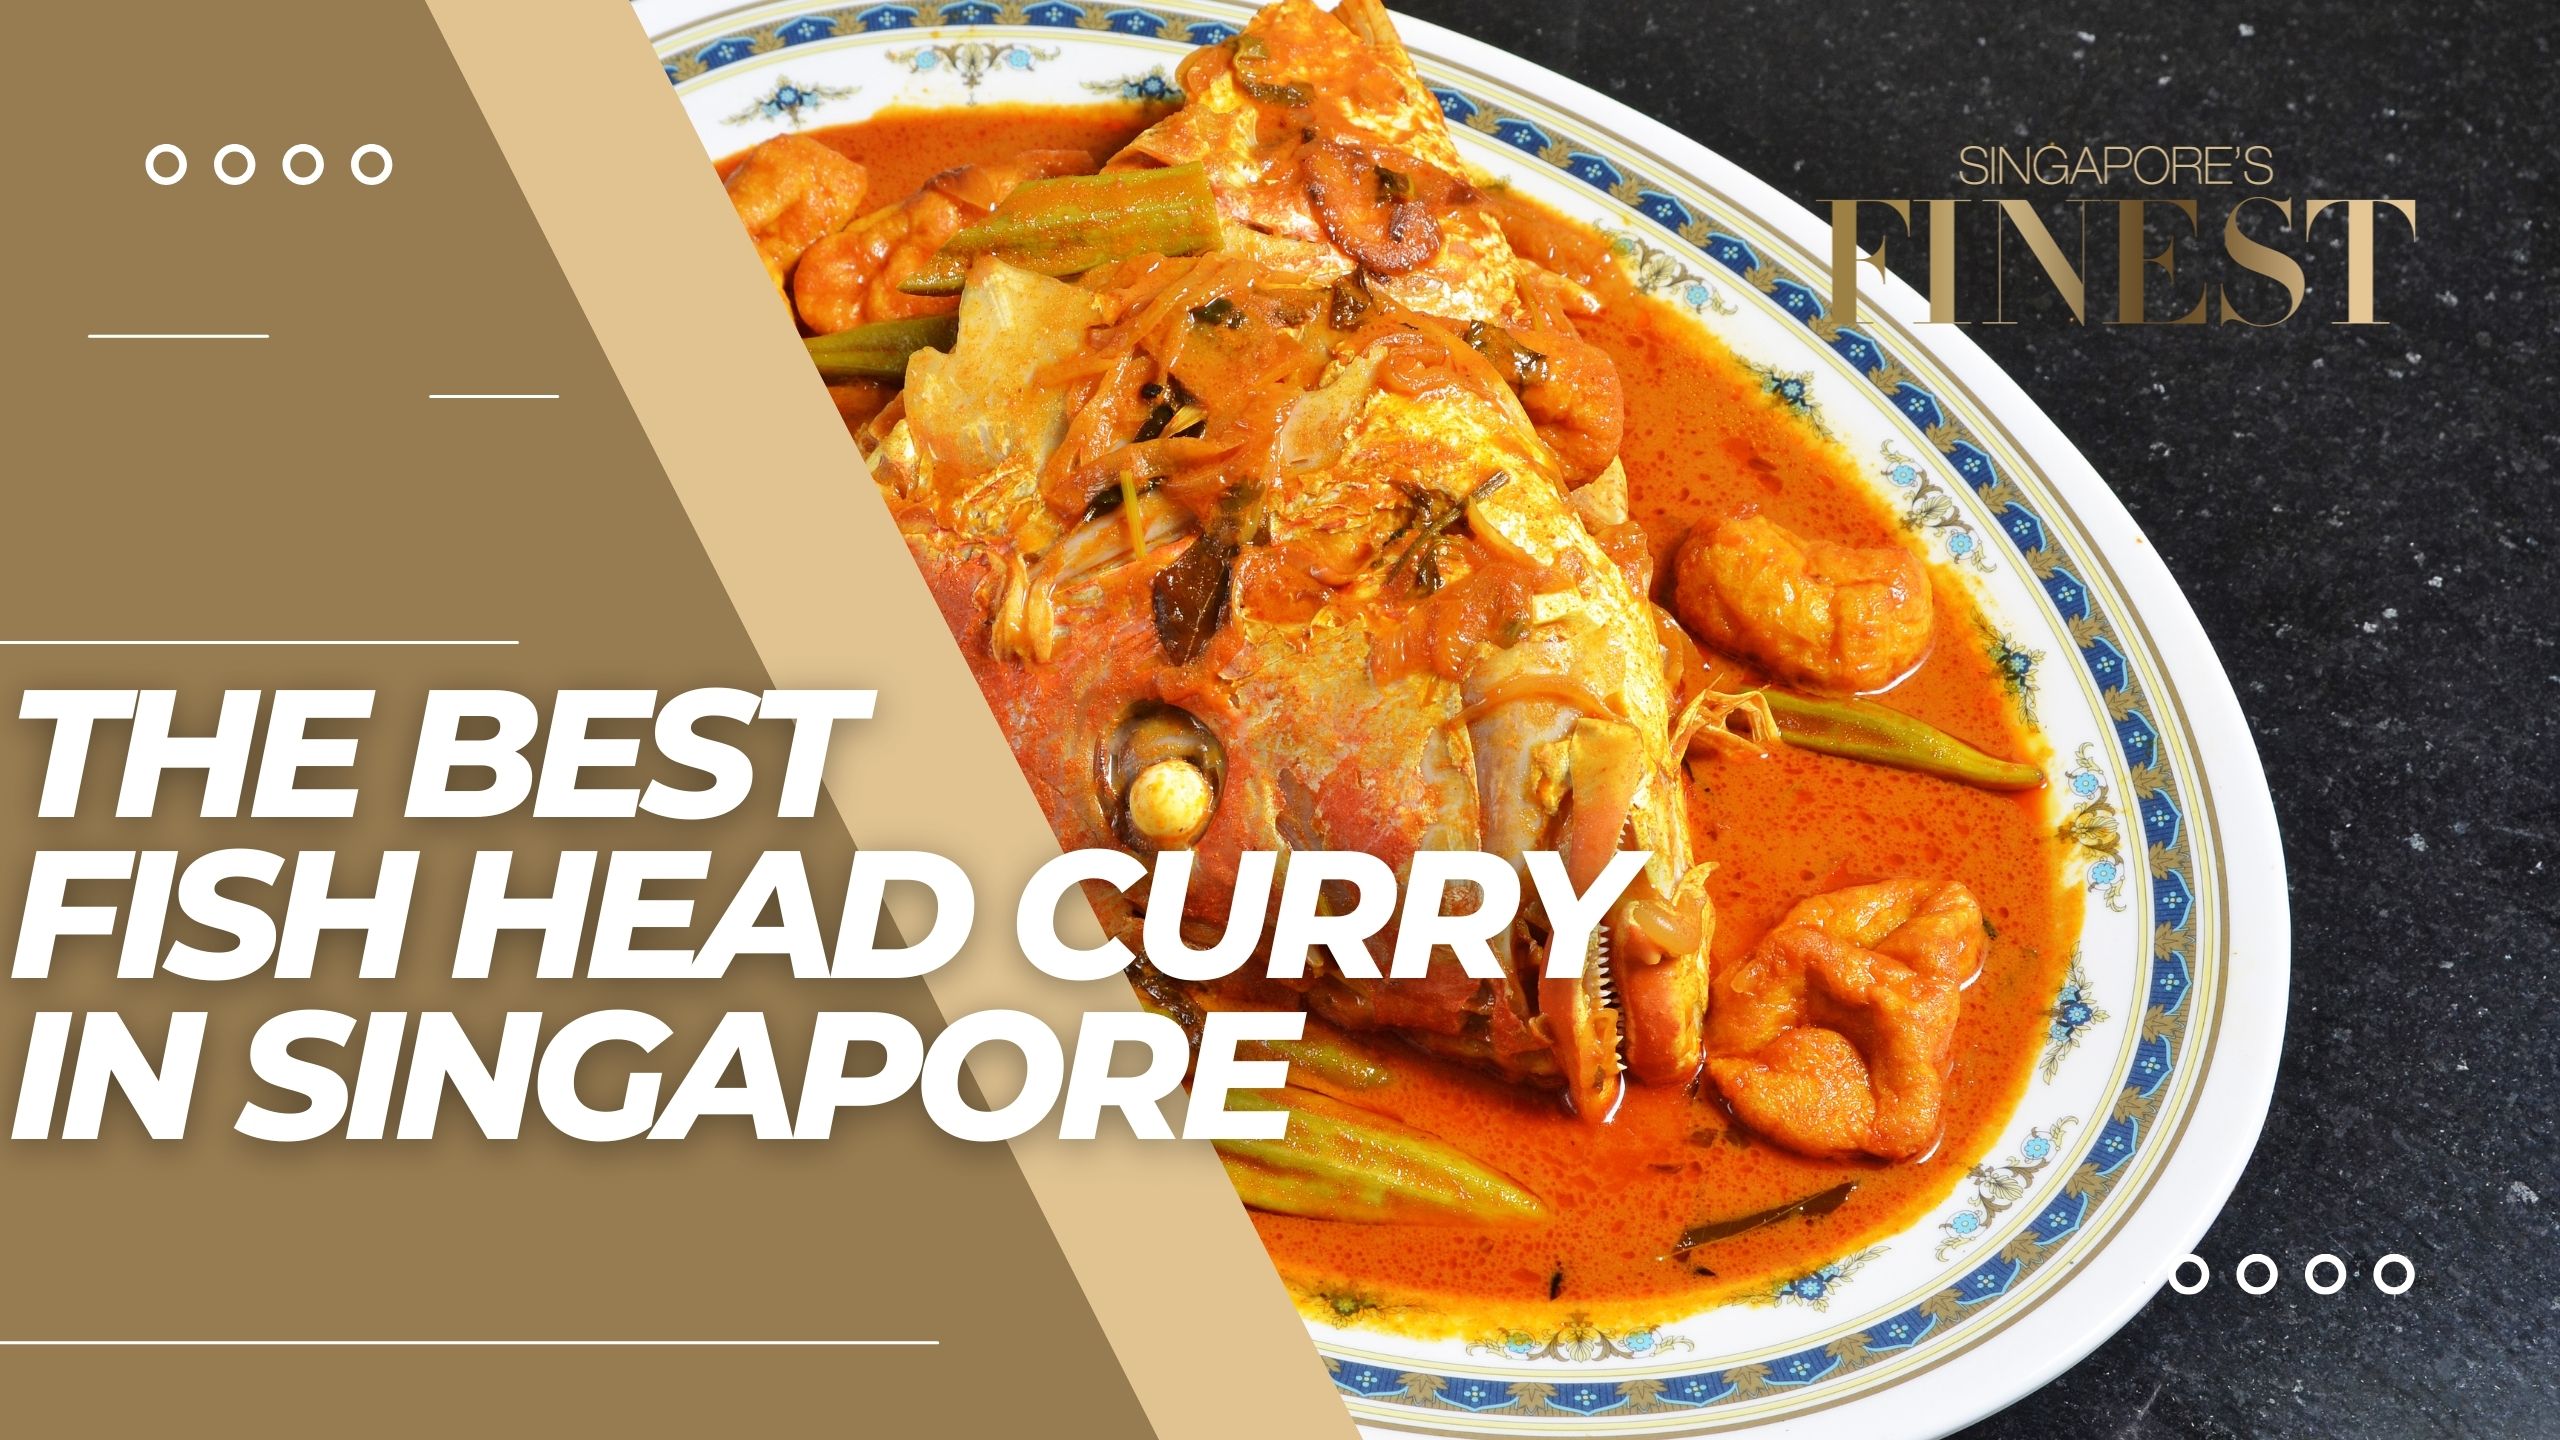 The Finest Fish Head Curry in Singapore